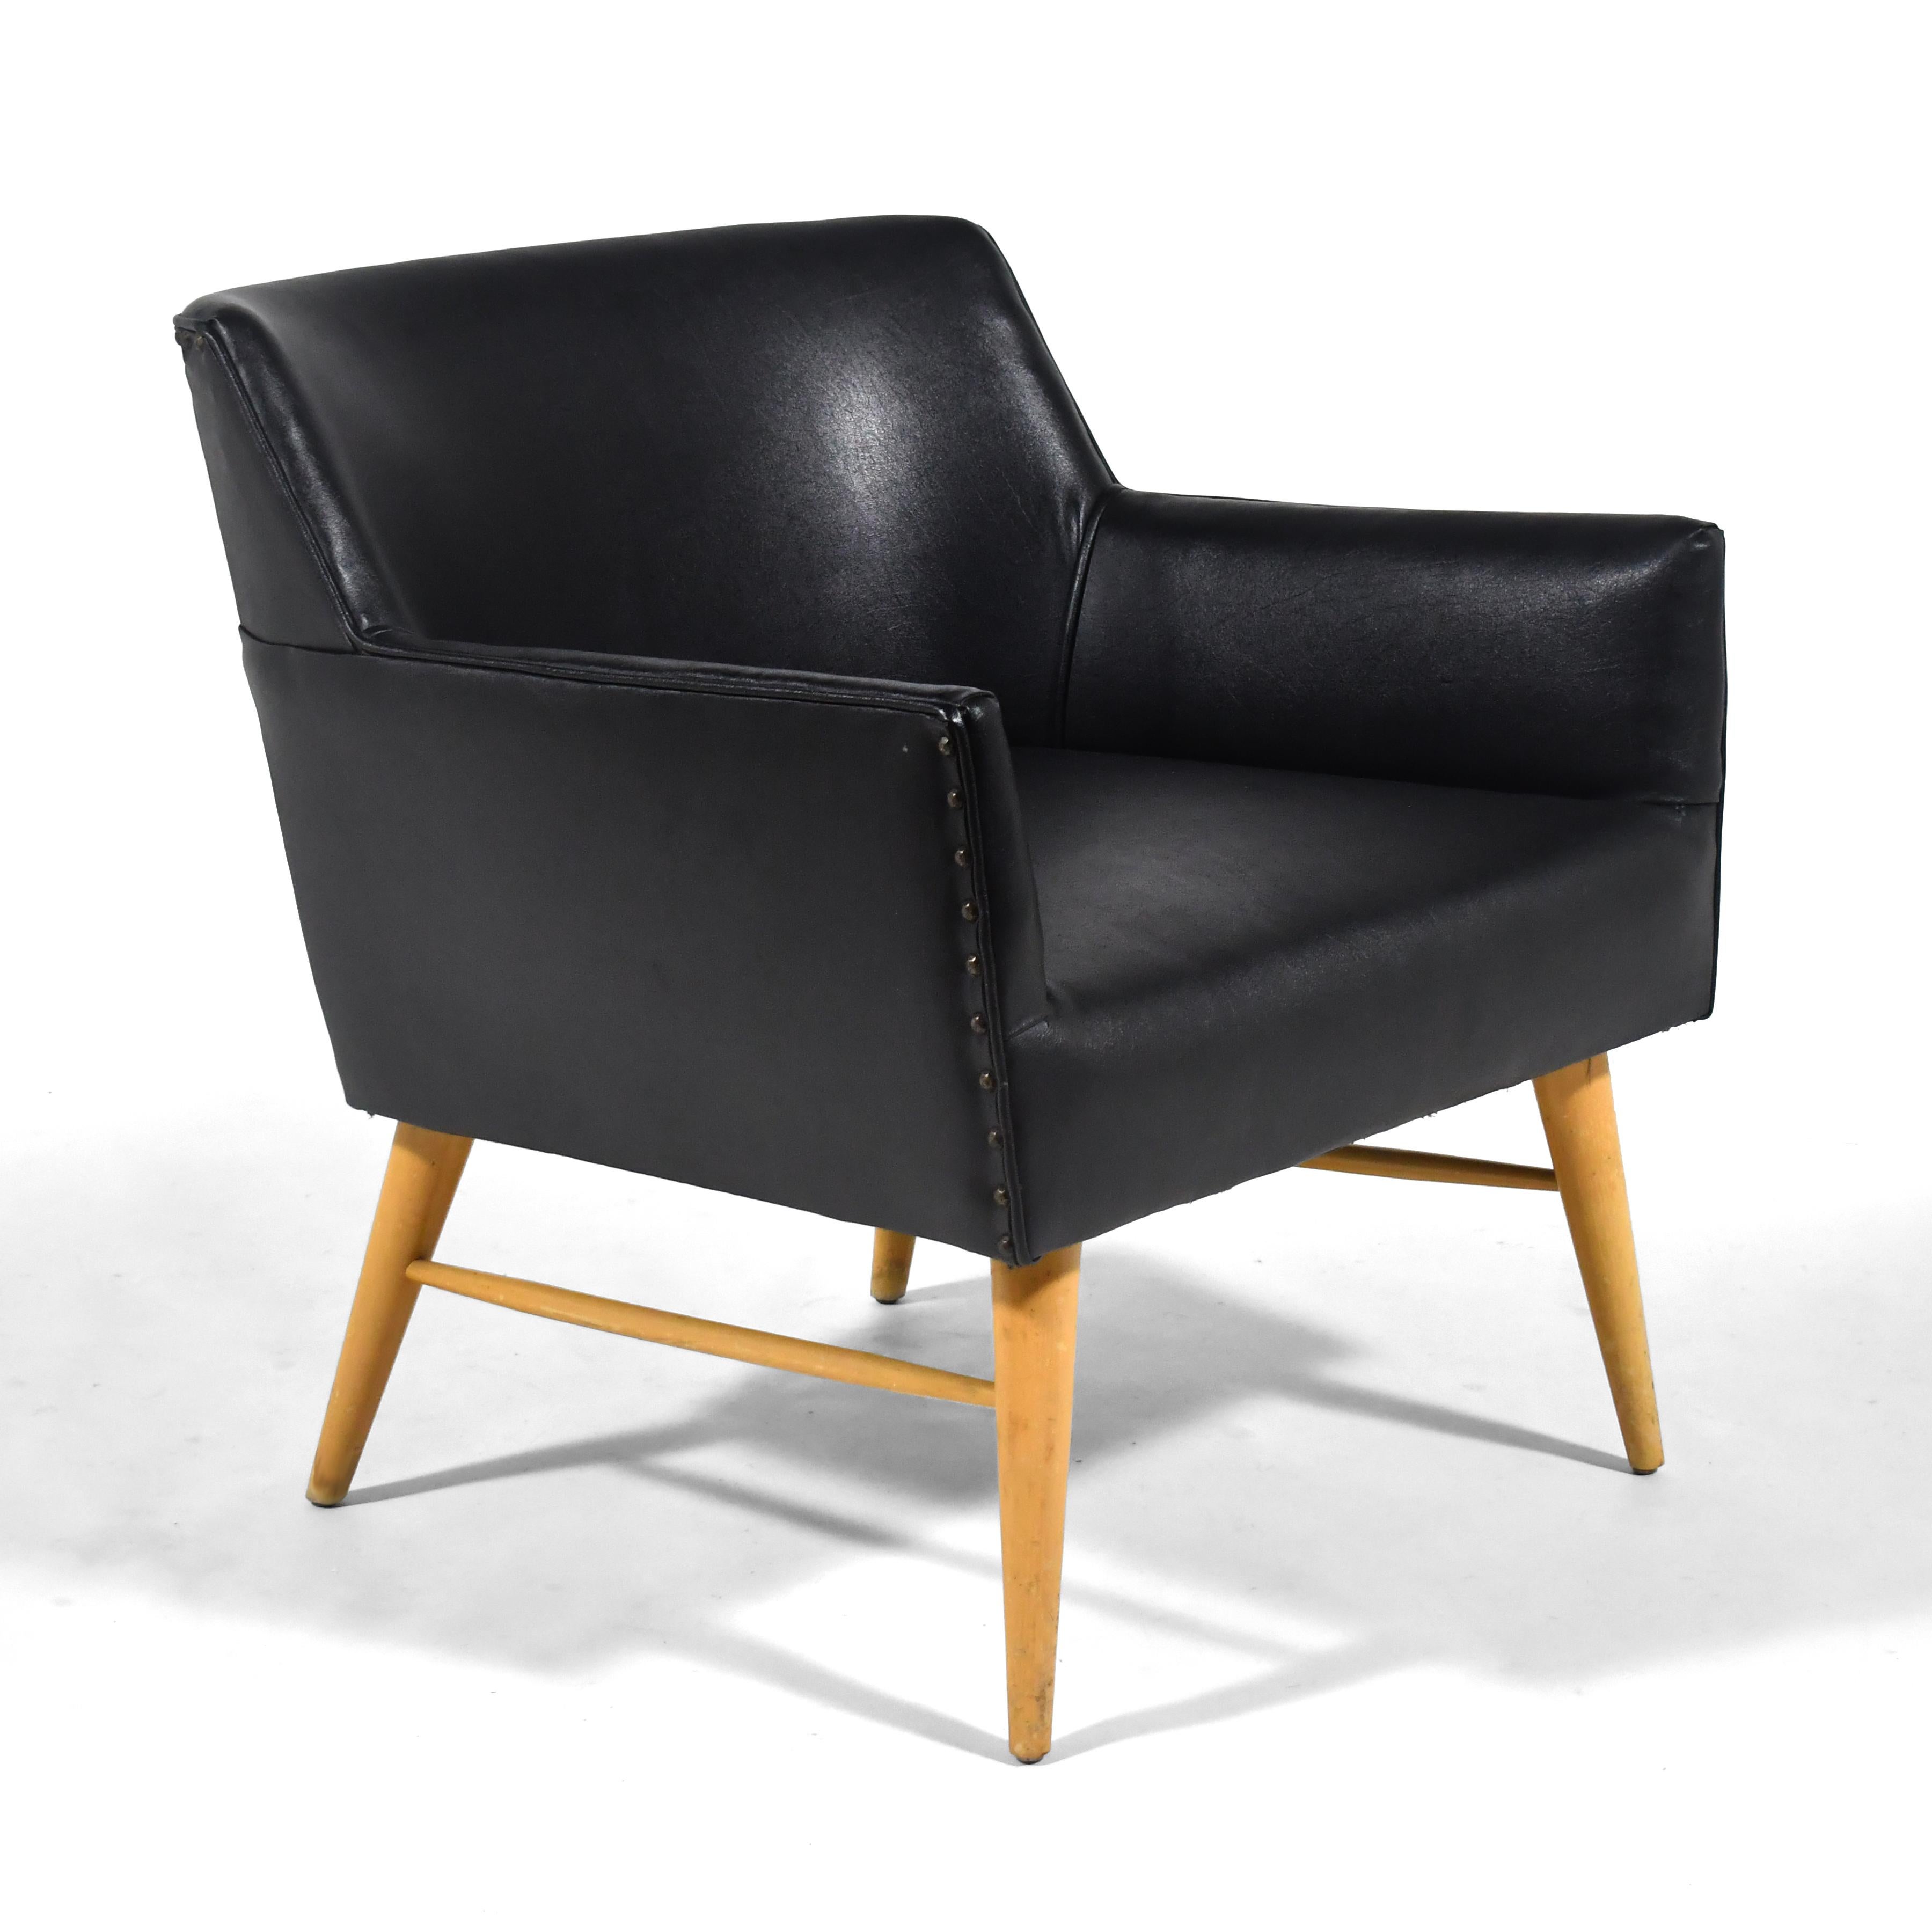 This uncommon design by Paul McCobb is classic mid-century modern design. With it's clean lines and splayed tapered legs, it is stylish but unpretentious. A generous seat makes it very comfortable and its solid build quality means it can easily be